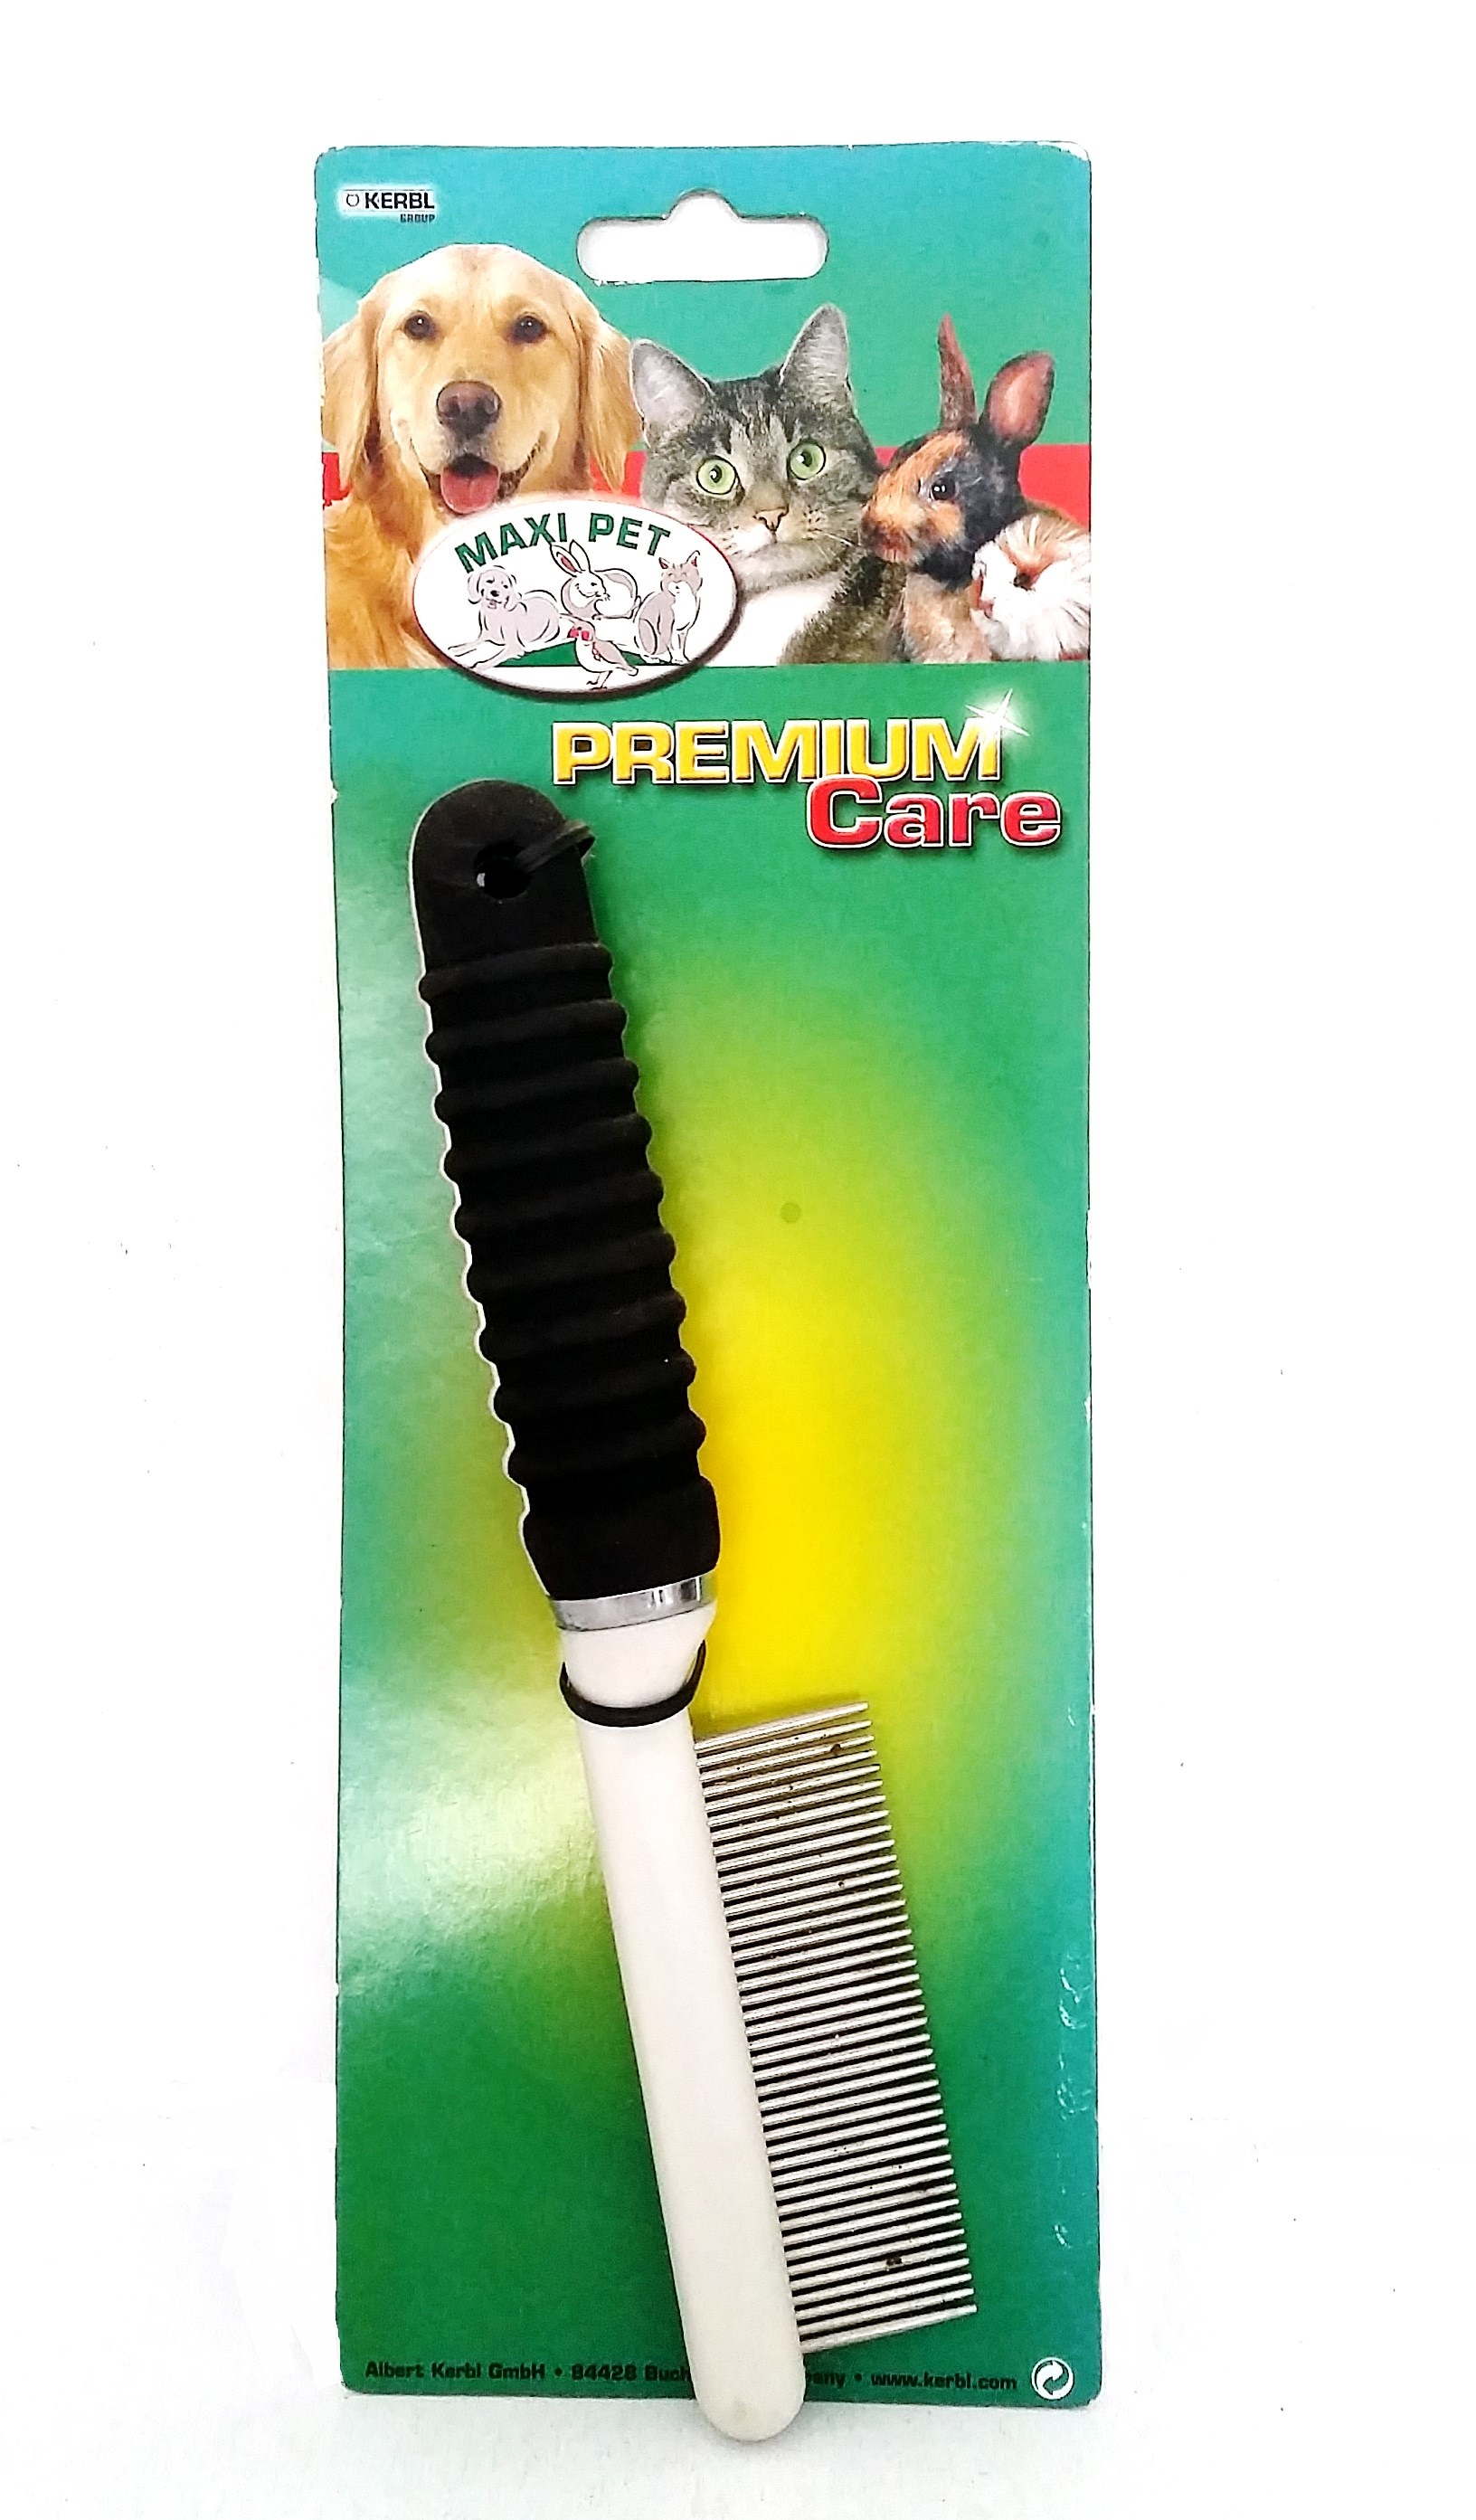 Comb for removing fur, narrow spaced teeth